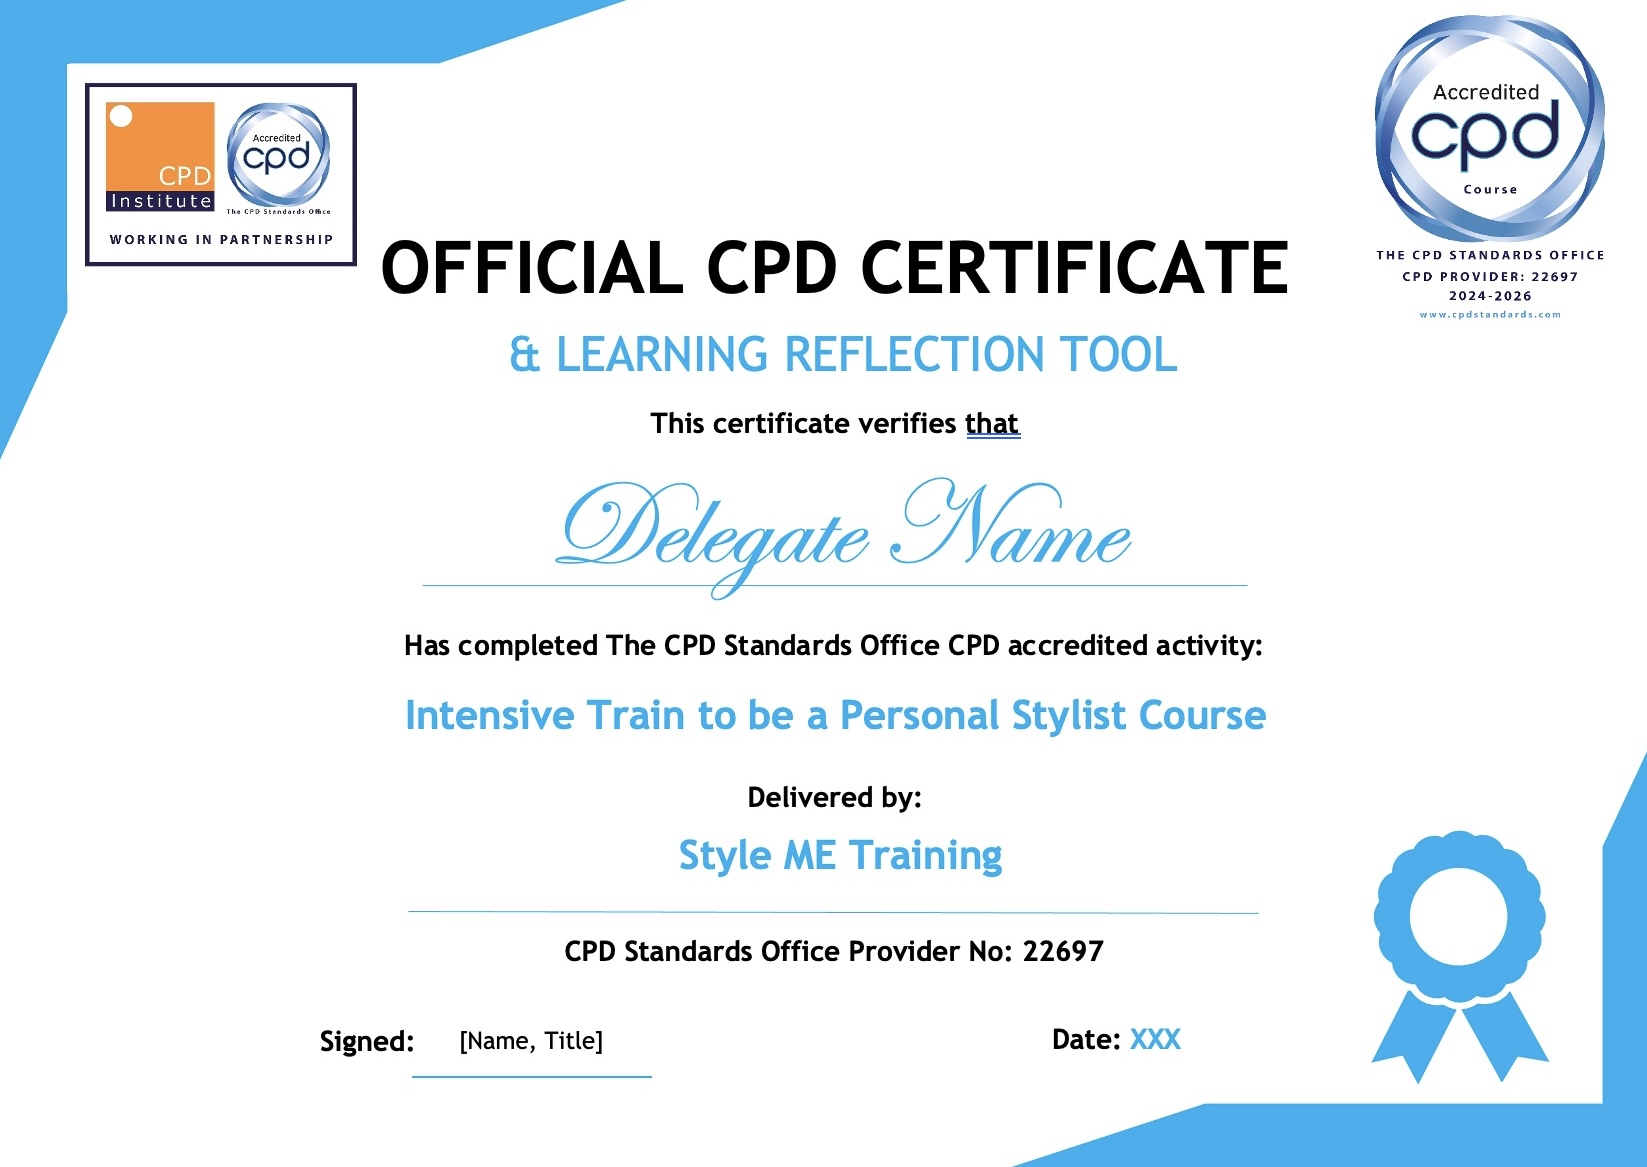 Style ME Training Academy is Accredited!